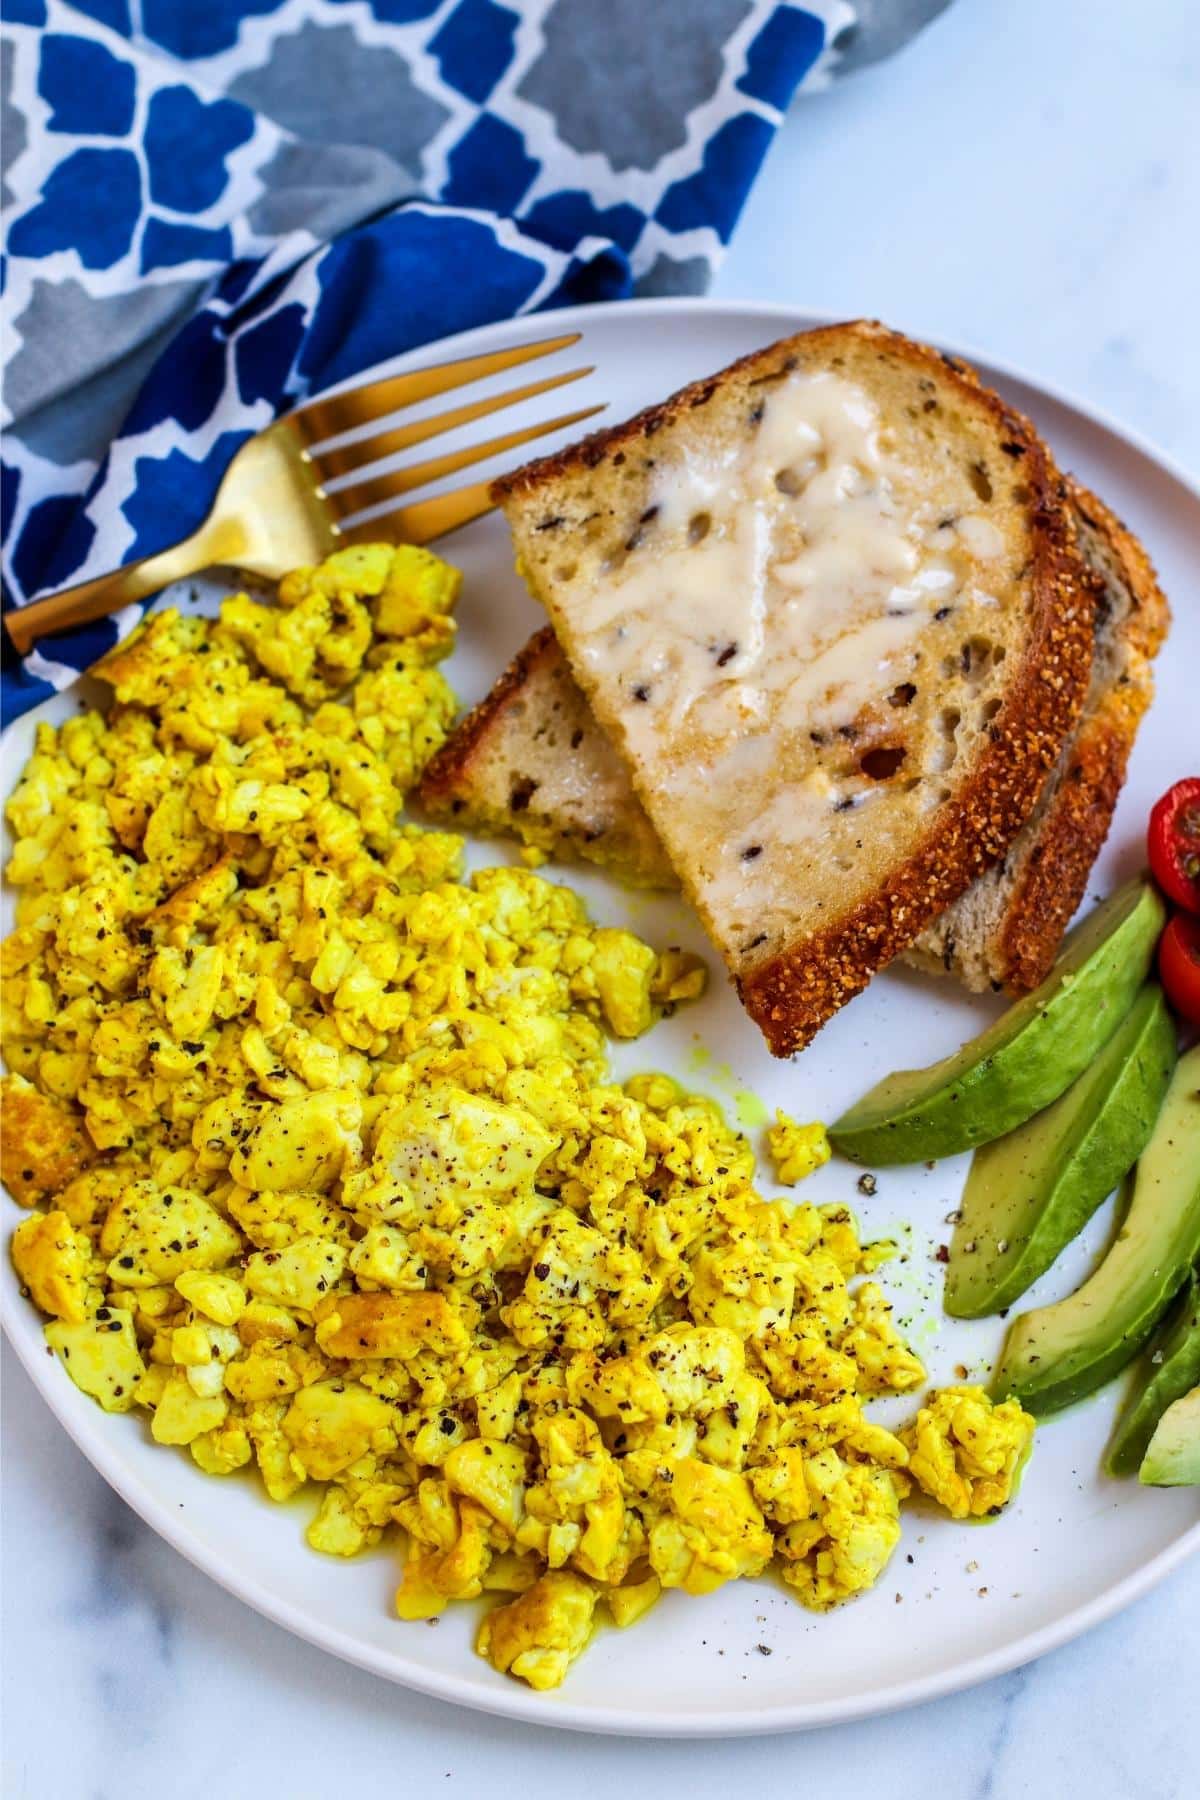 Close up image of the scrambled tofu on a plate with toast and avocado slices.